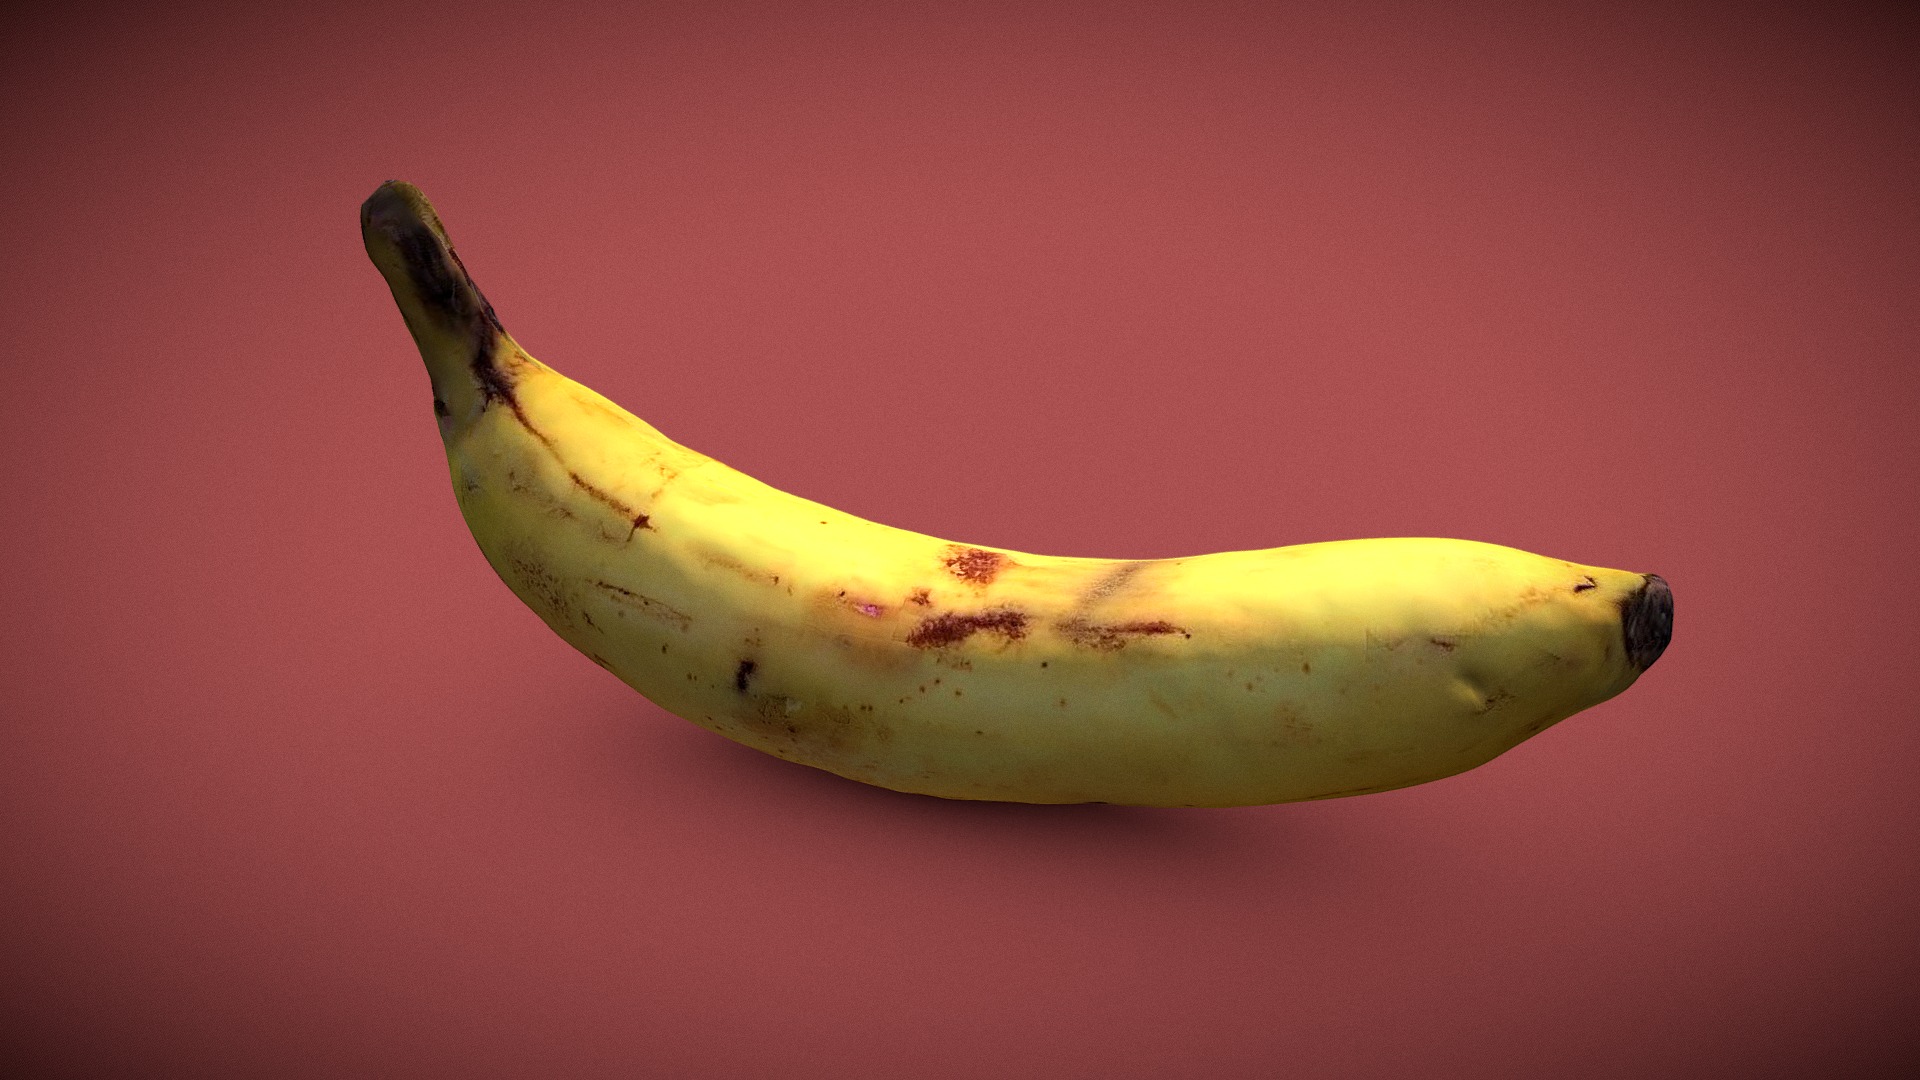 3D model Banana - This is a 3D model of the Banana. The 3D model is about a banana on a pink surface.